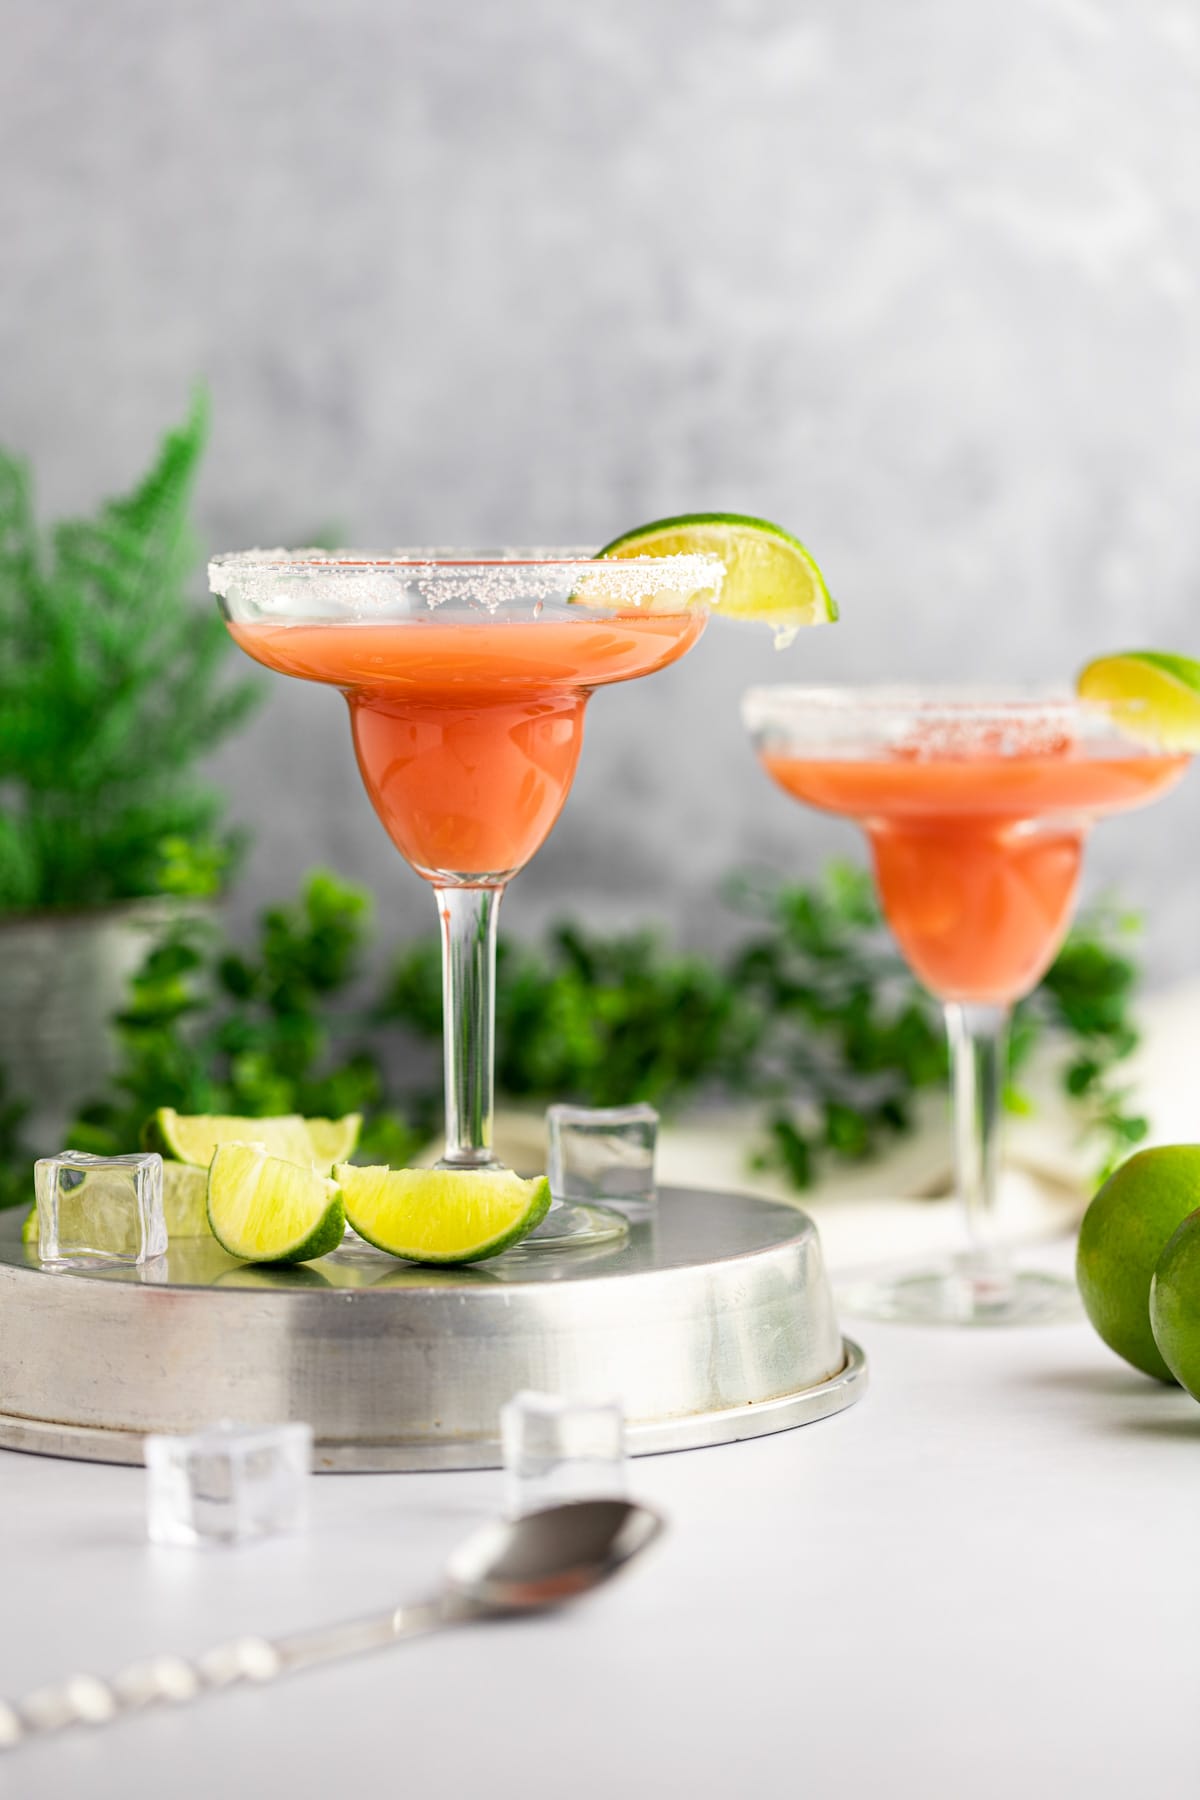 A guava margarita on an upside down round metal tray, next to lime slices and ice cubes, with greenery and another drink in the background.